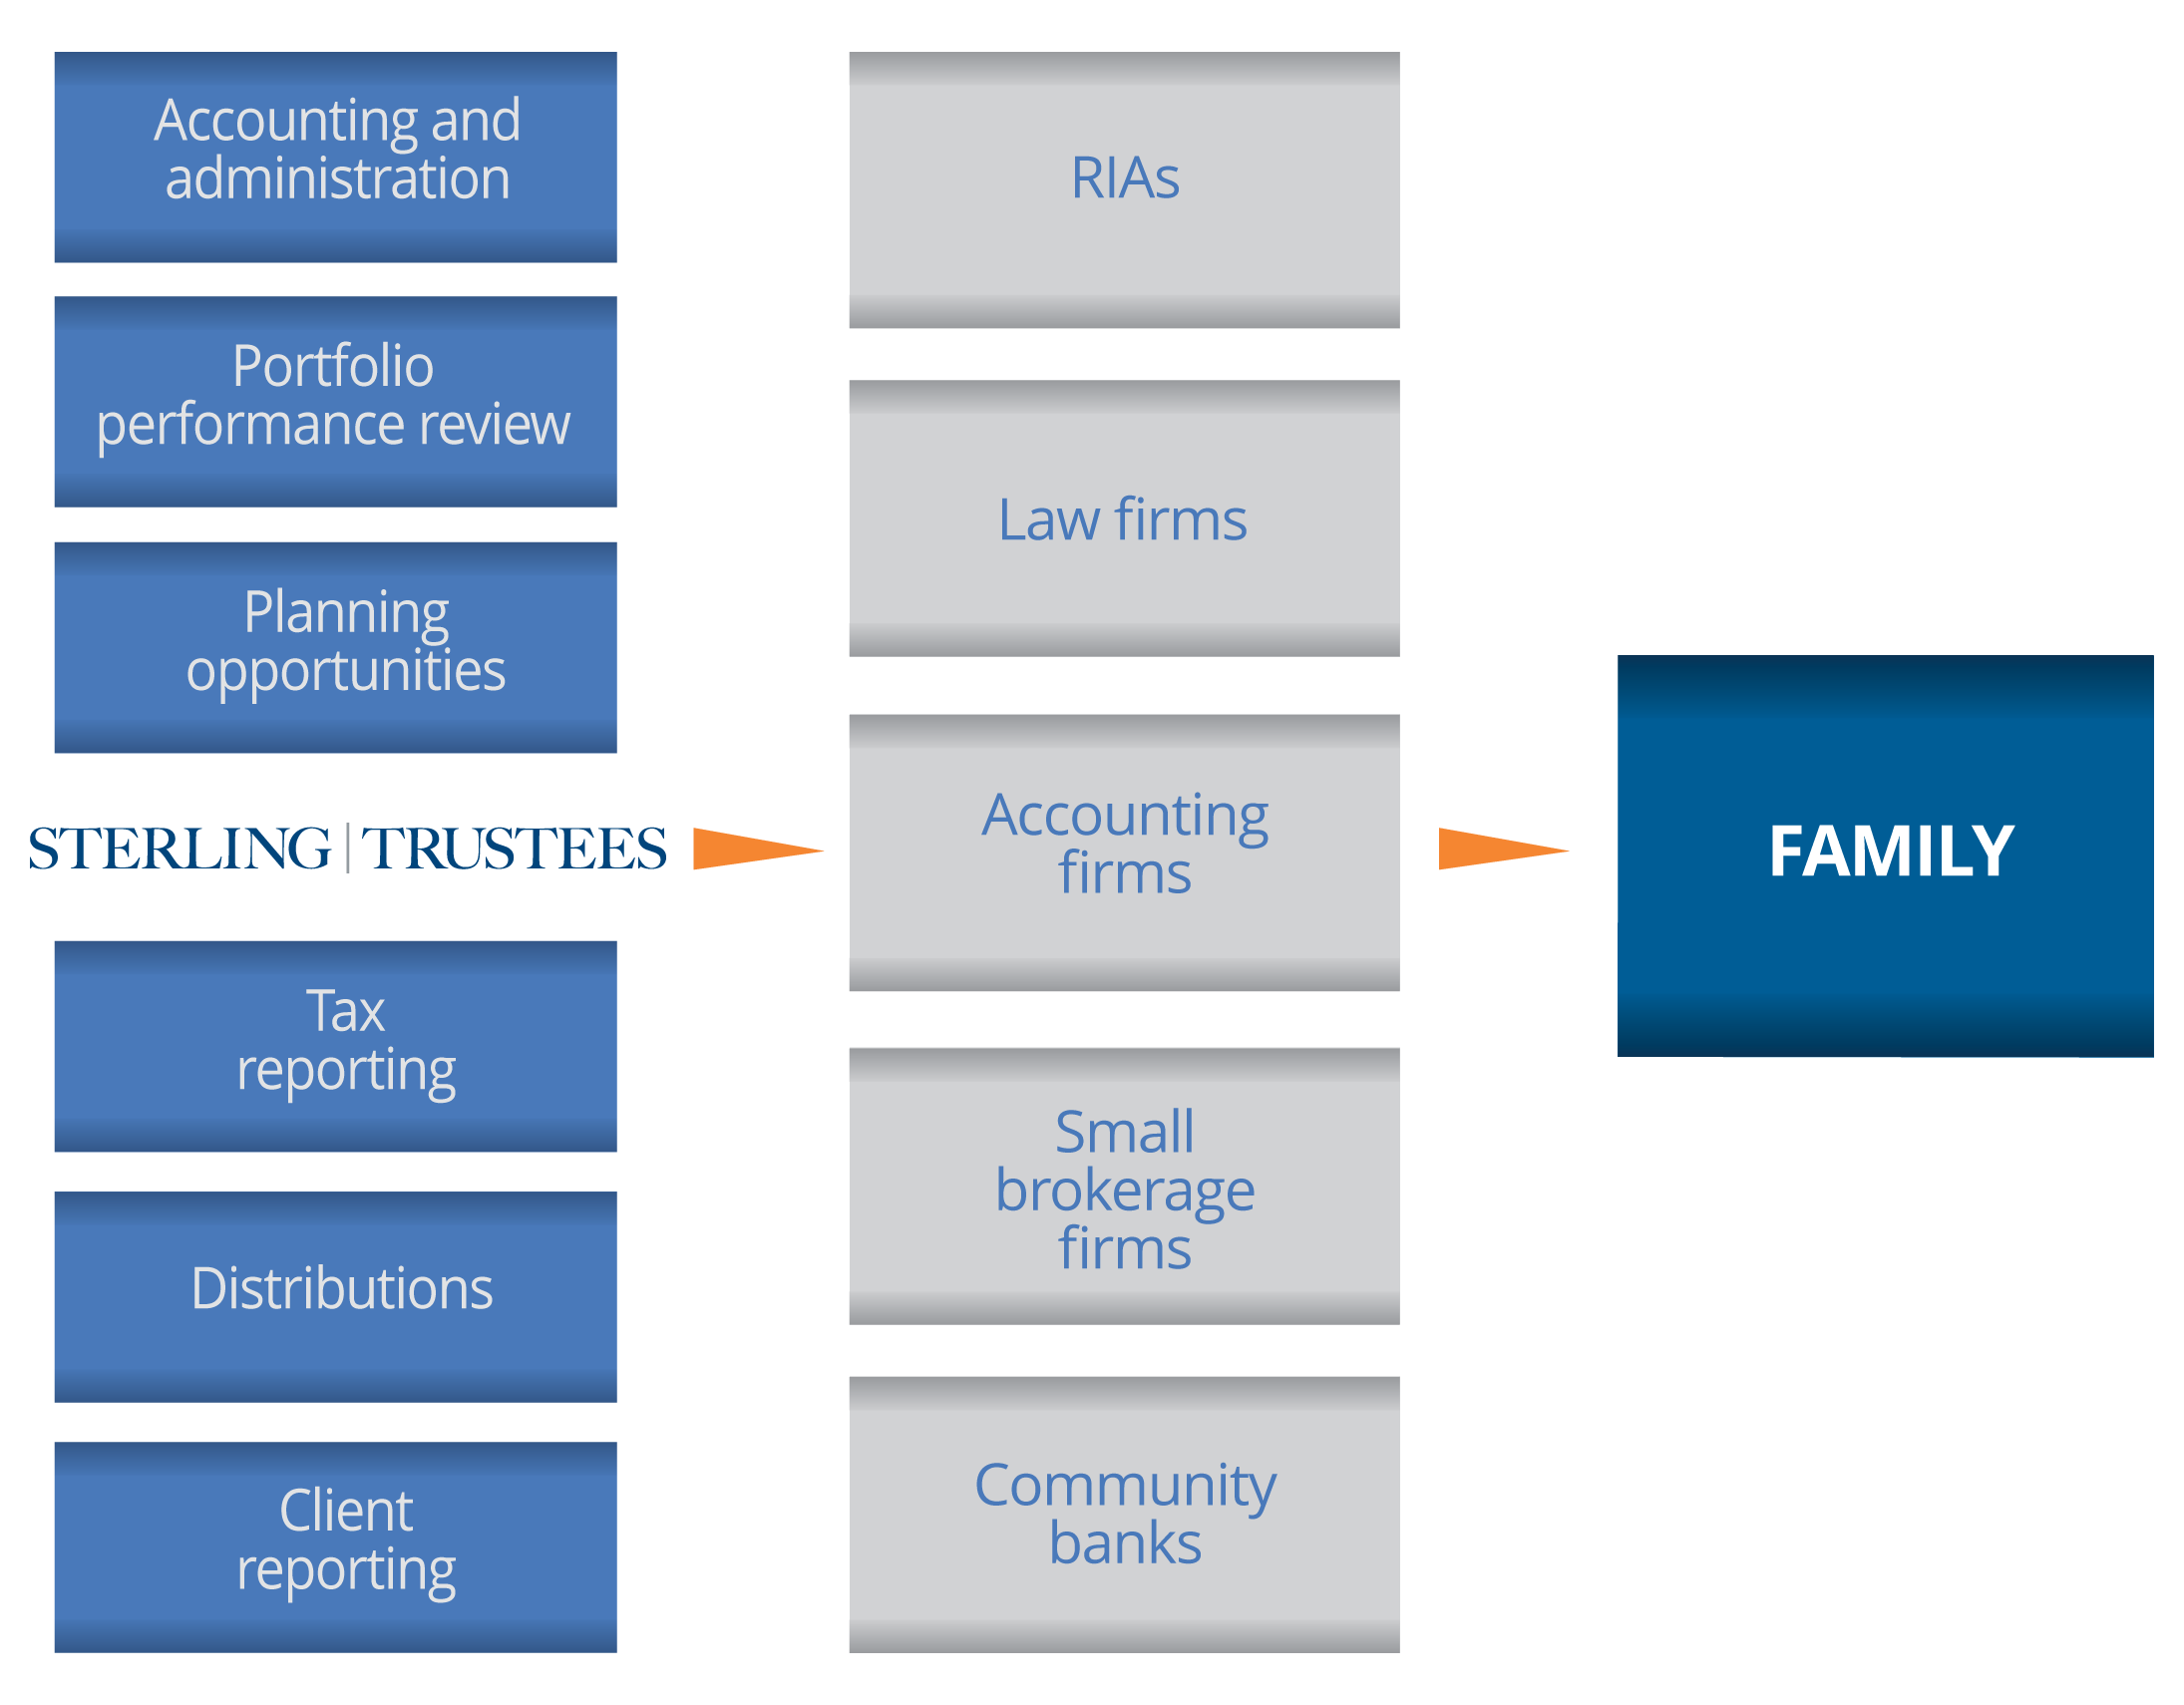 Illustrates the trust services provided by Sterling Trustees in a private label model for law firms, RIAs, accounting firms and the family